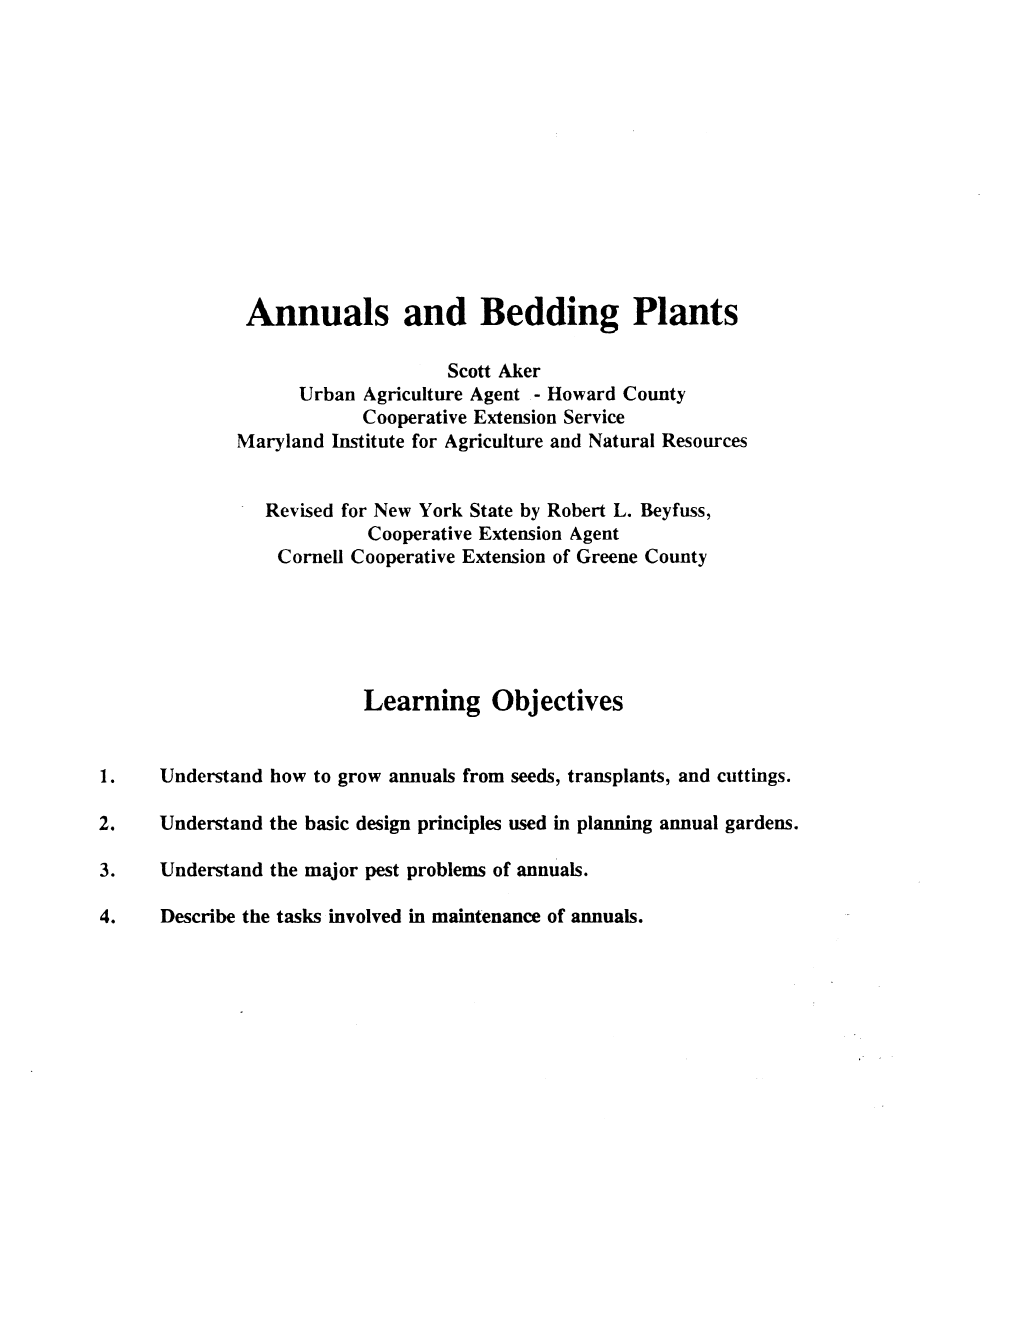 Annuals and Bedding Plants